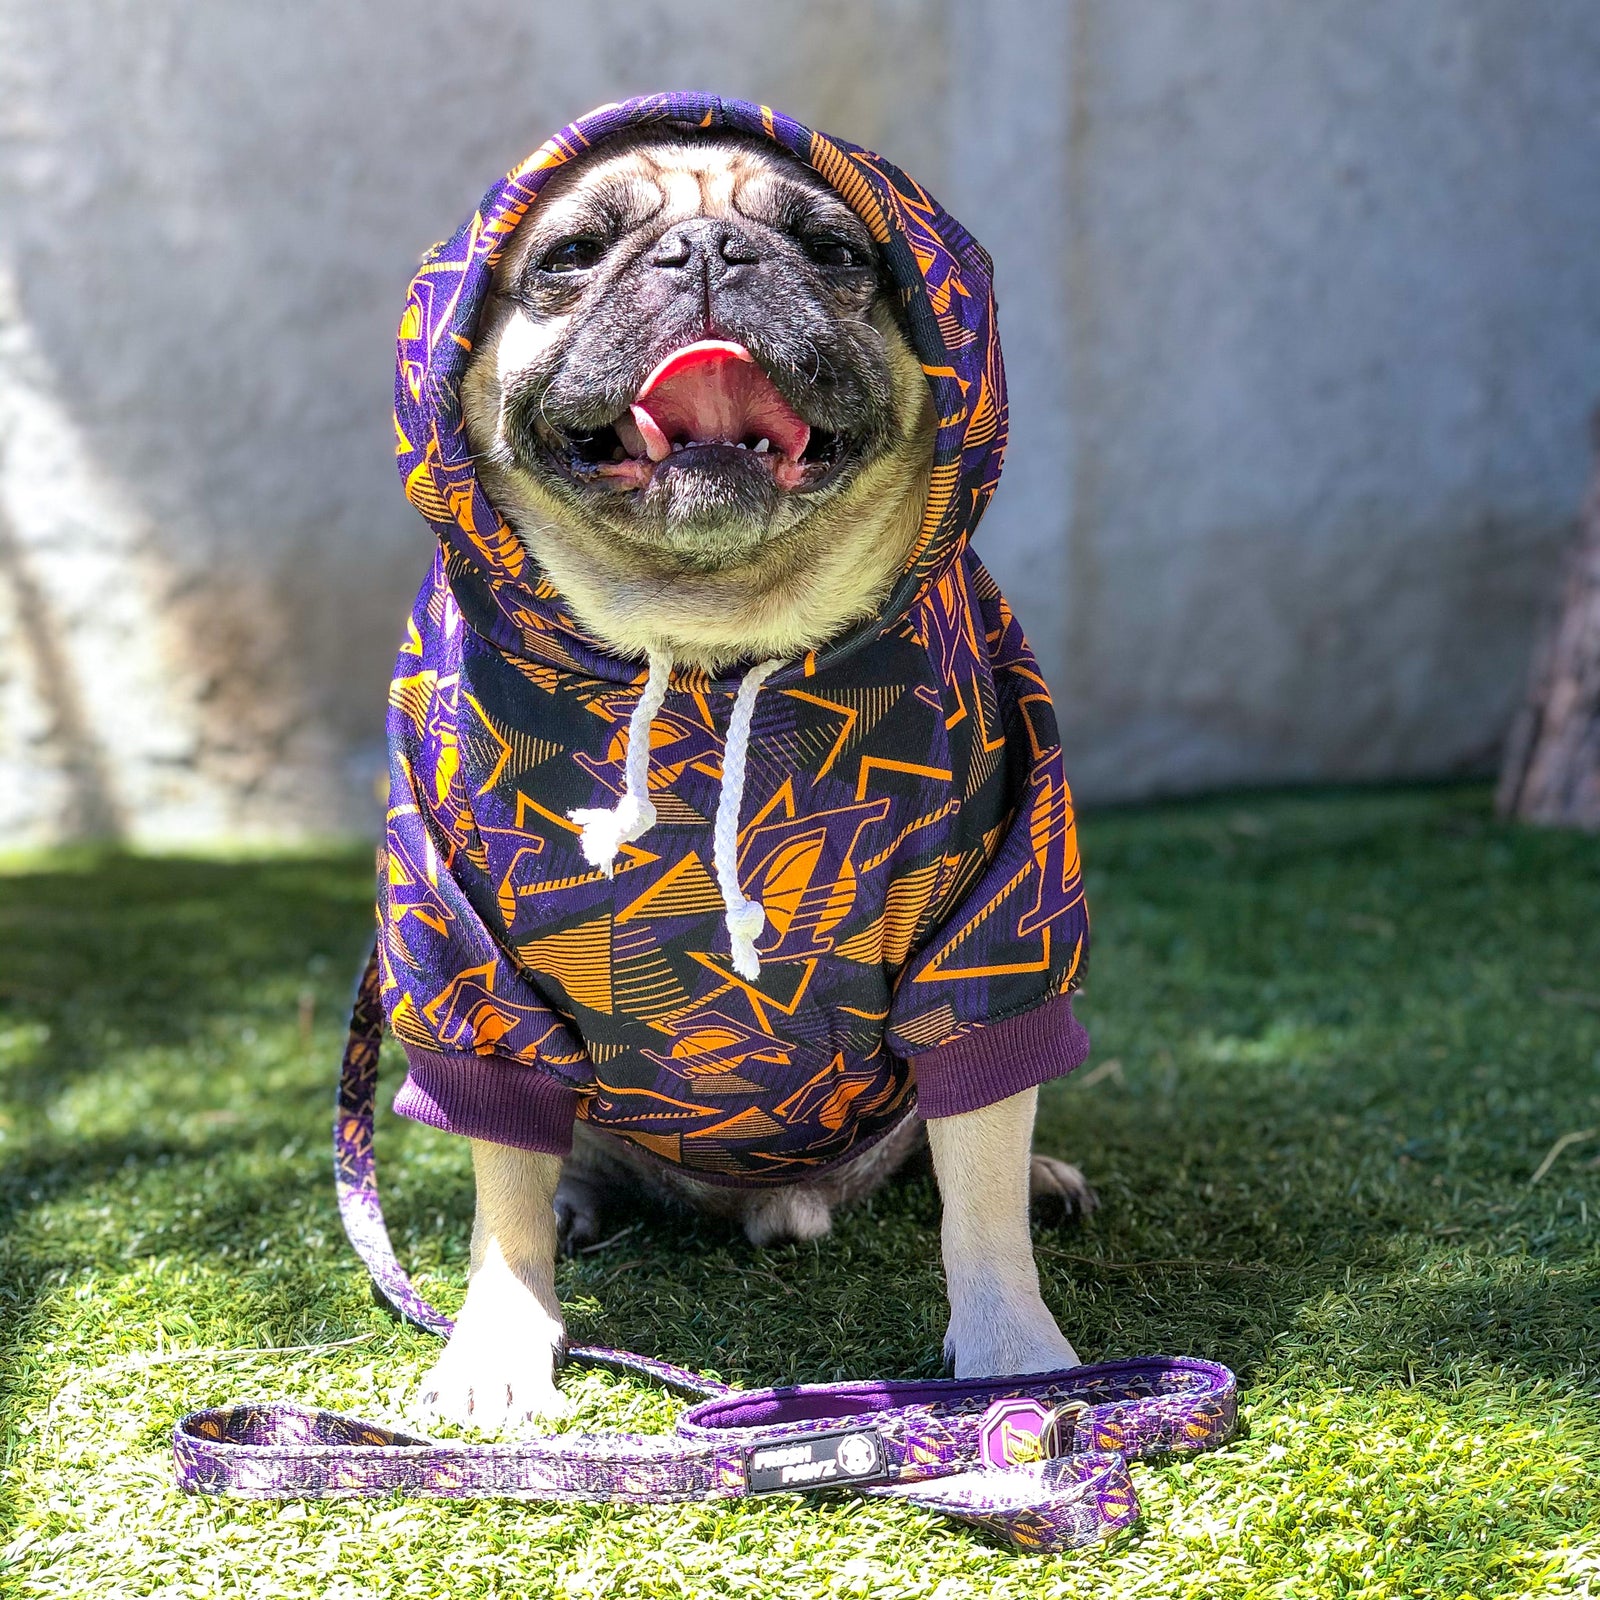 The Official Streetwear Brand for Dogs - @freshpawz